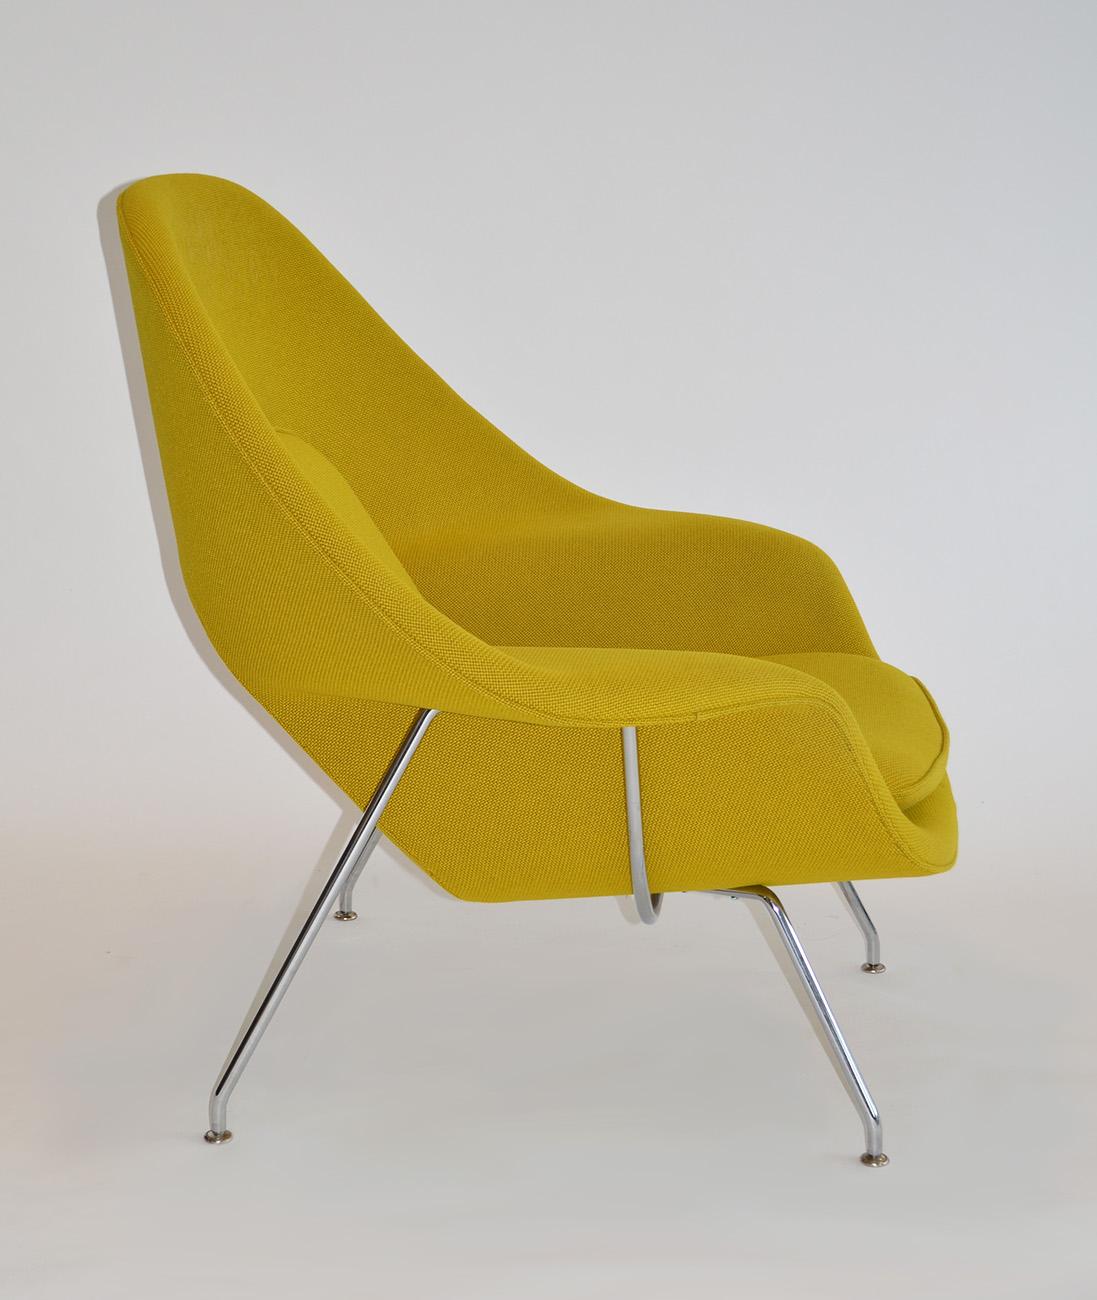 rove concepts womb chair